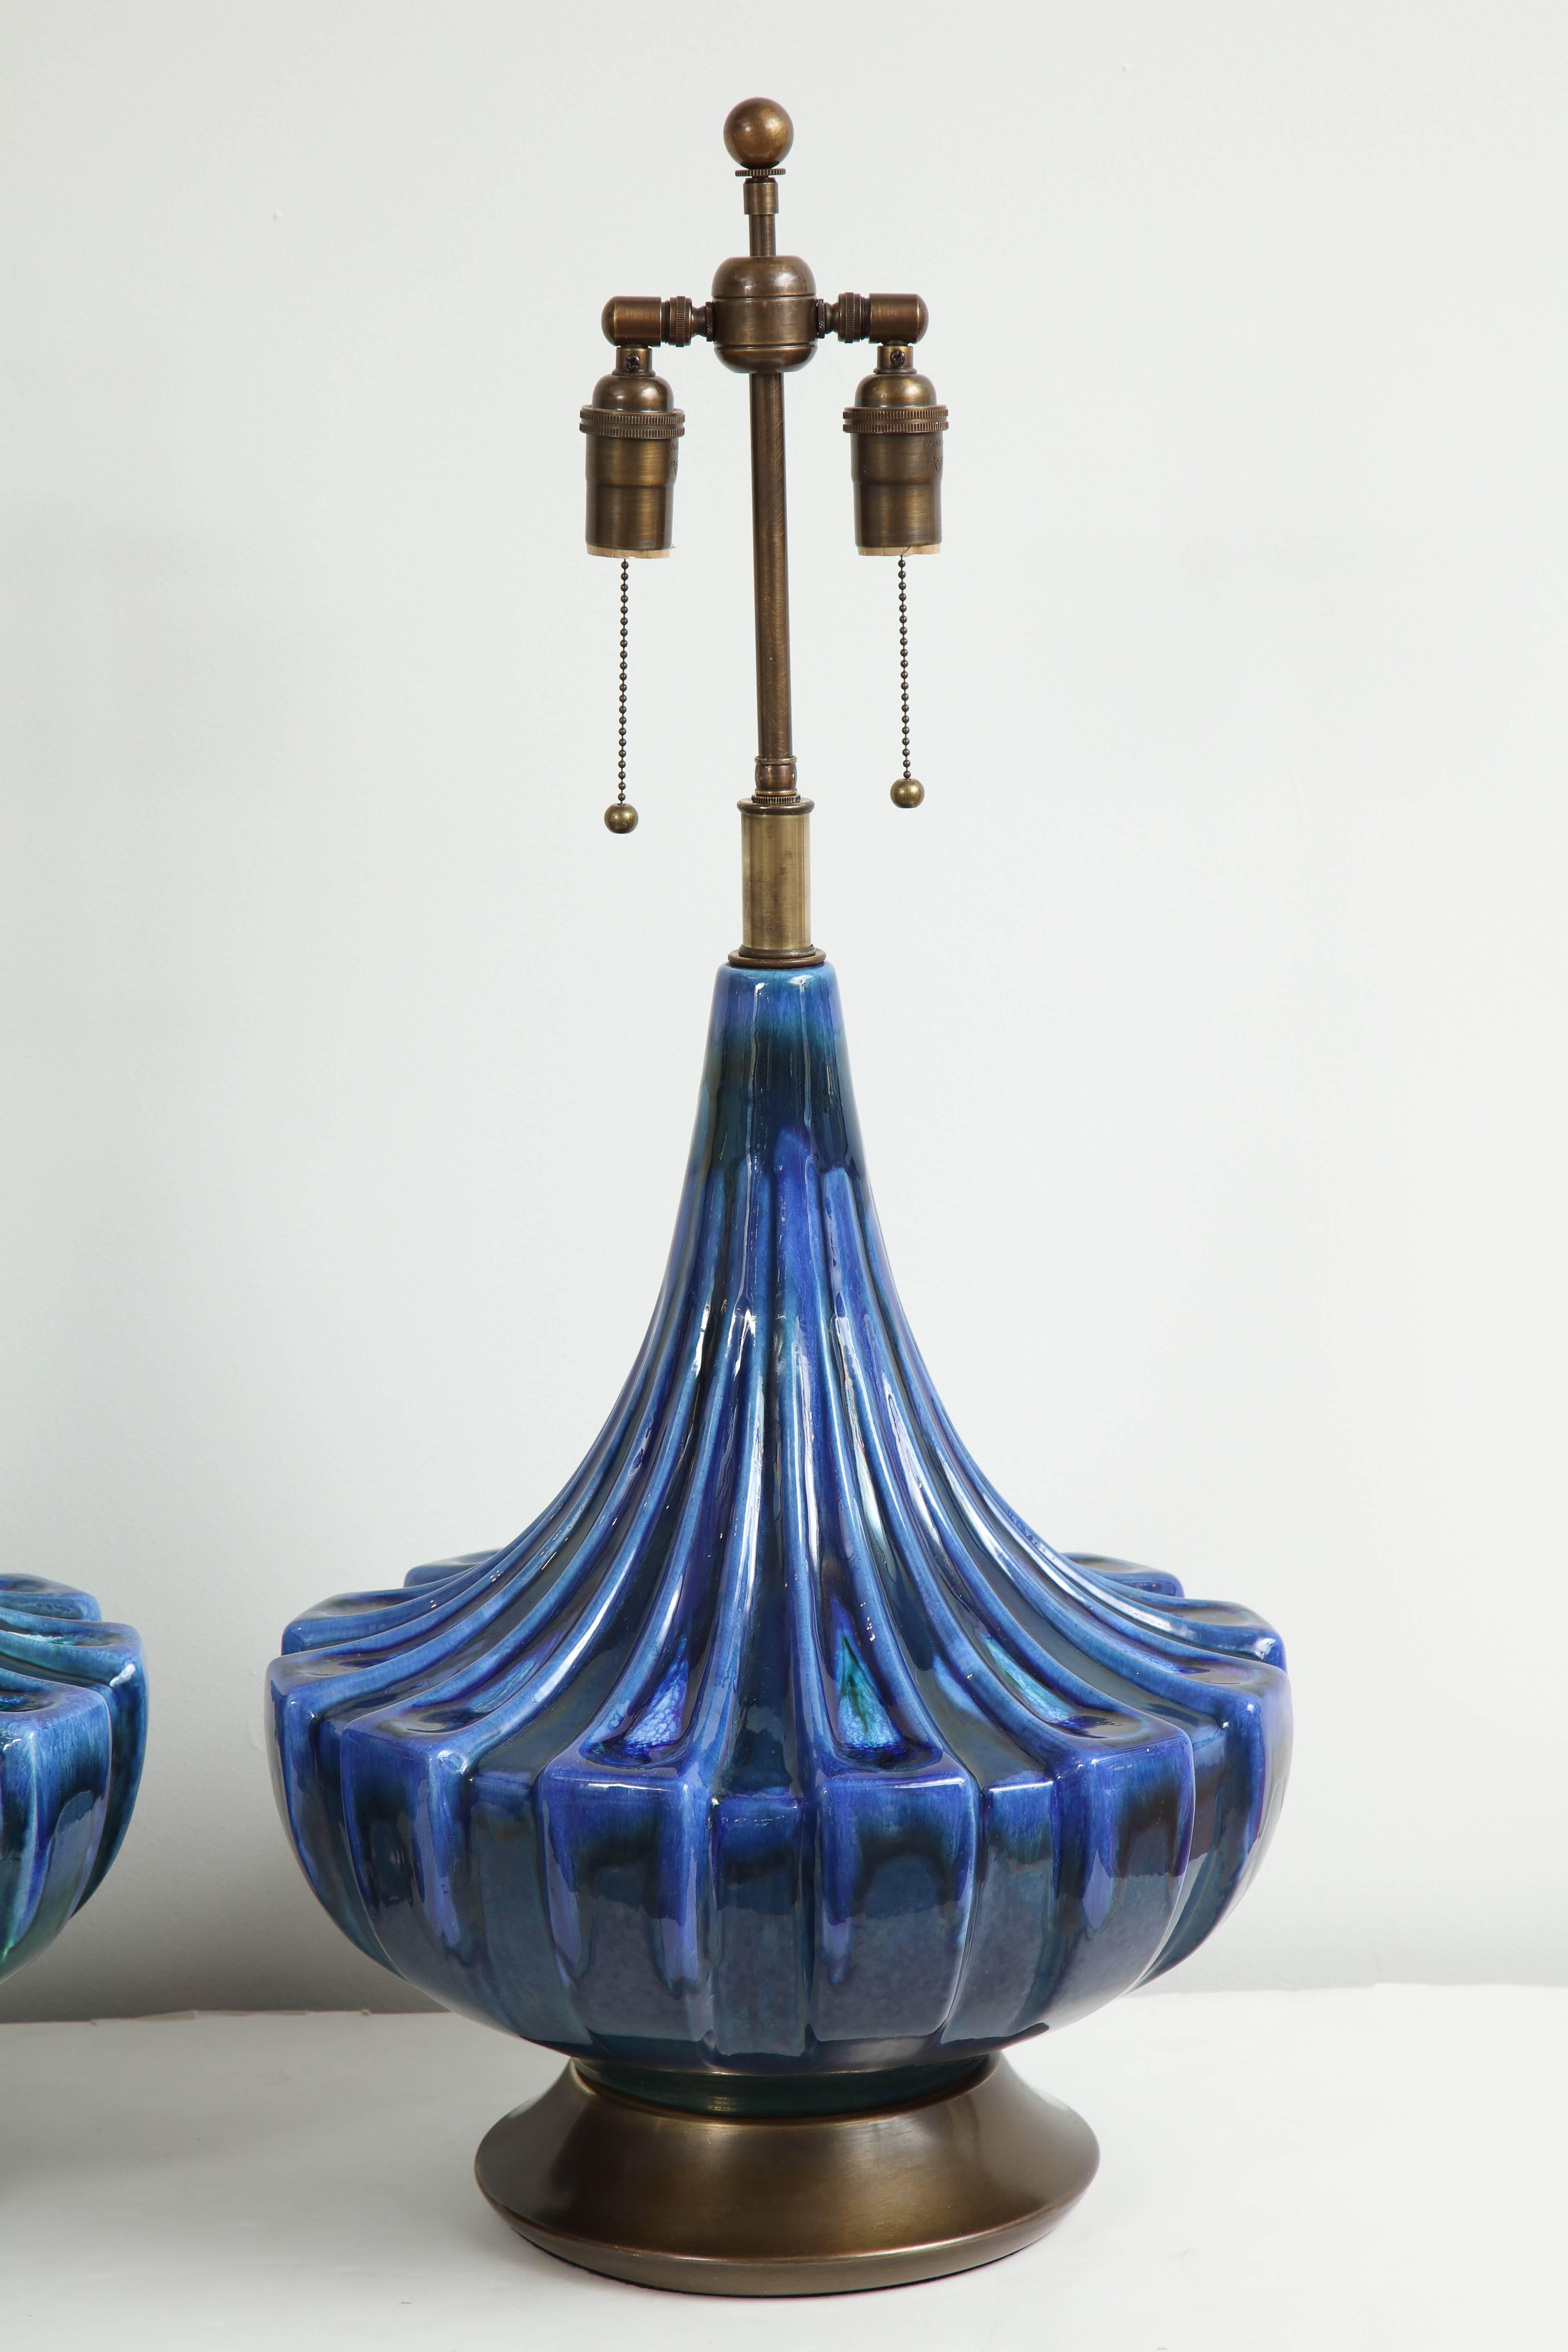 Large pair of ceramic lamps with a beautiful blue drip glaze finish.
The lamps have been Newly rewired for the US with antique bronzed double clusters which take standard light bulbs.